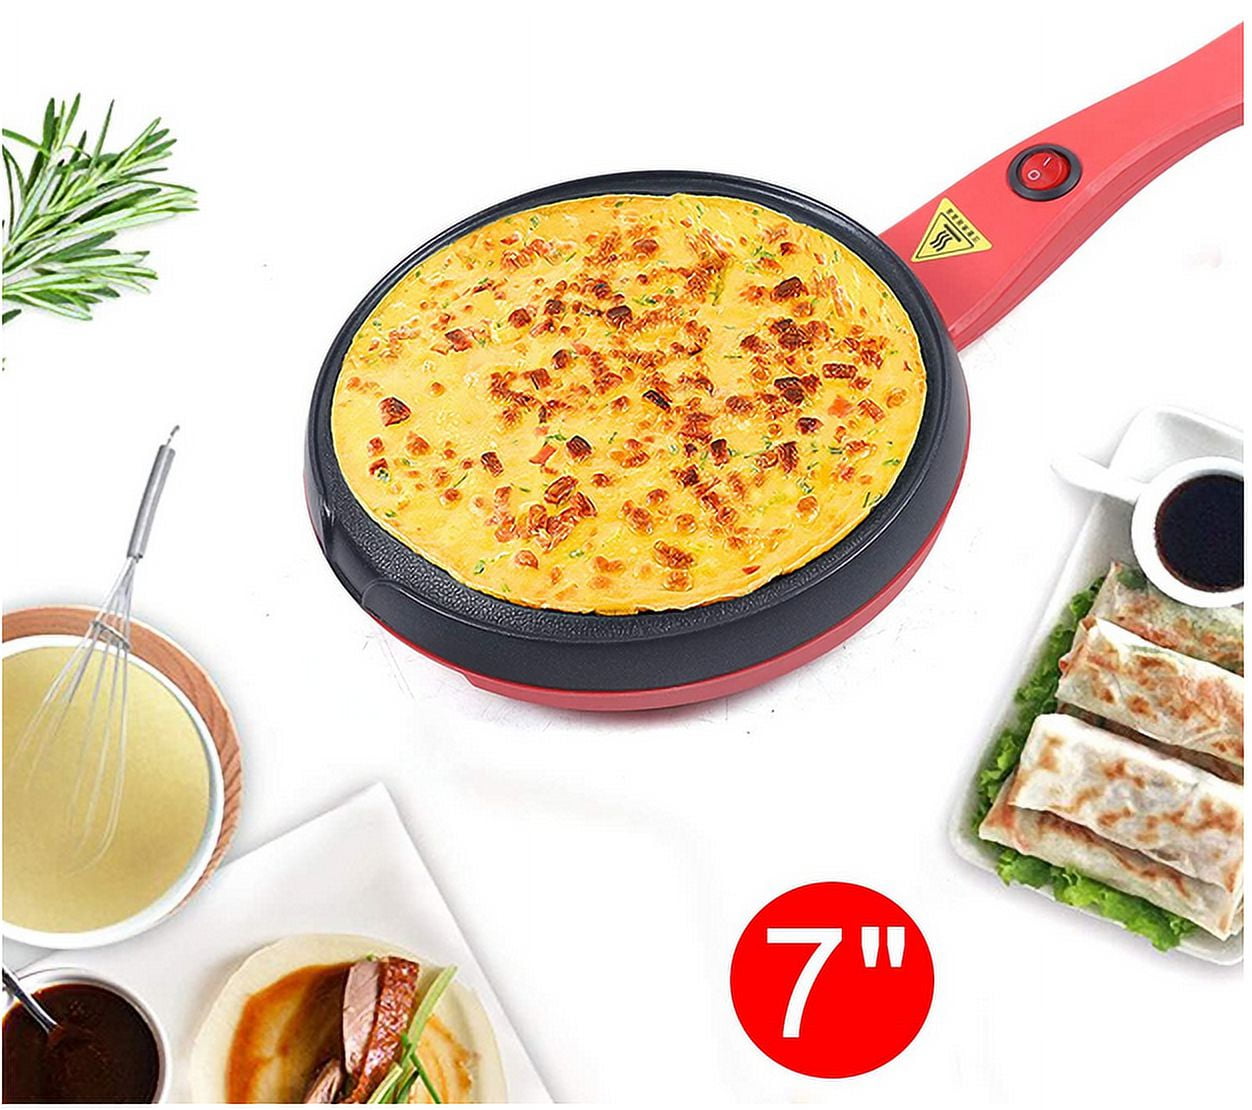 OUKANING 7'' Electric Non-Stick Crepe Maker Baking One-button Griddle Pancake  Pan Frying Griddle Machine 600W with Tray for Kids 